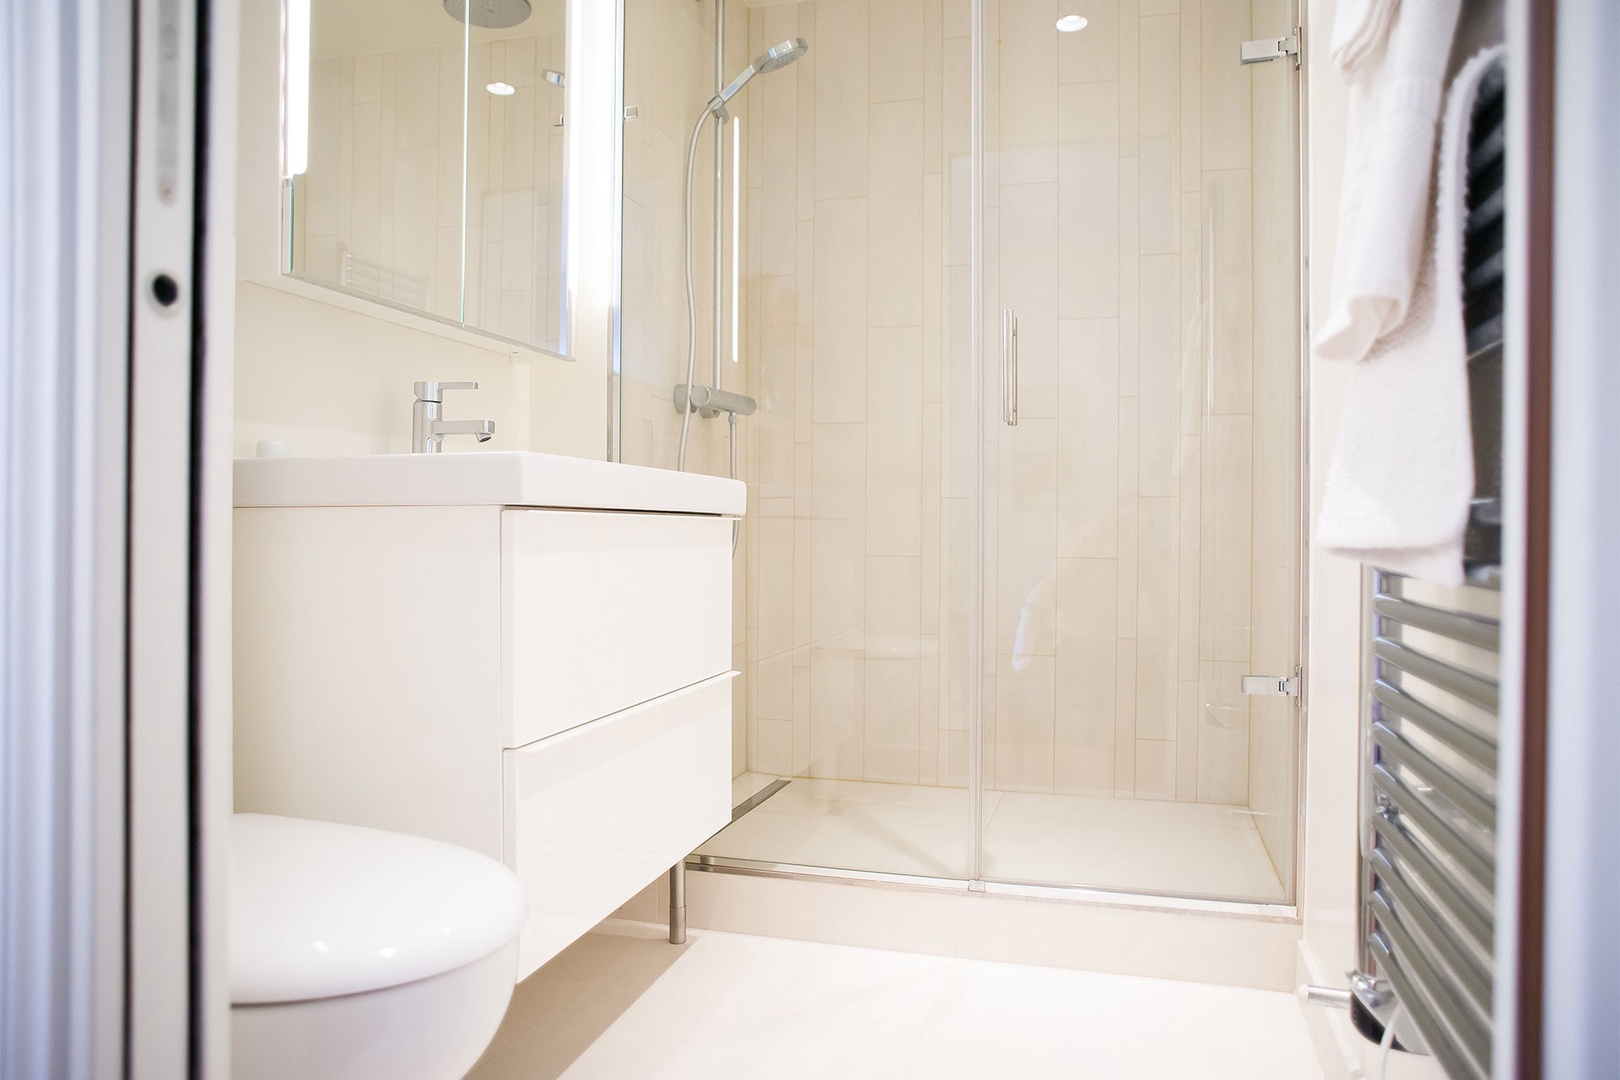 The luxurious en suite bathroom has a shower, sink and toilet.